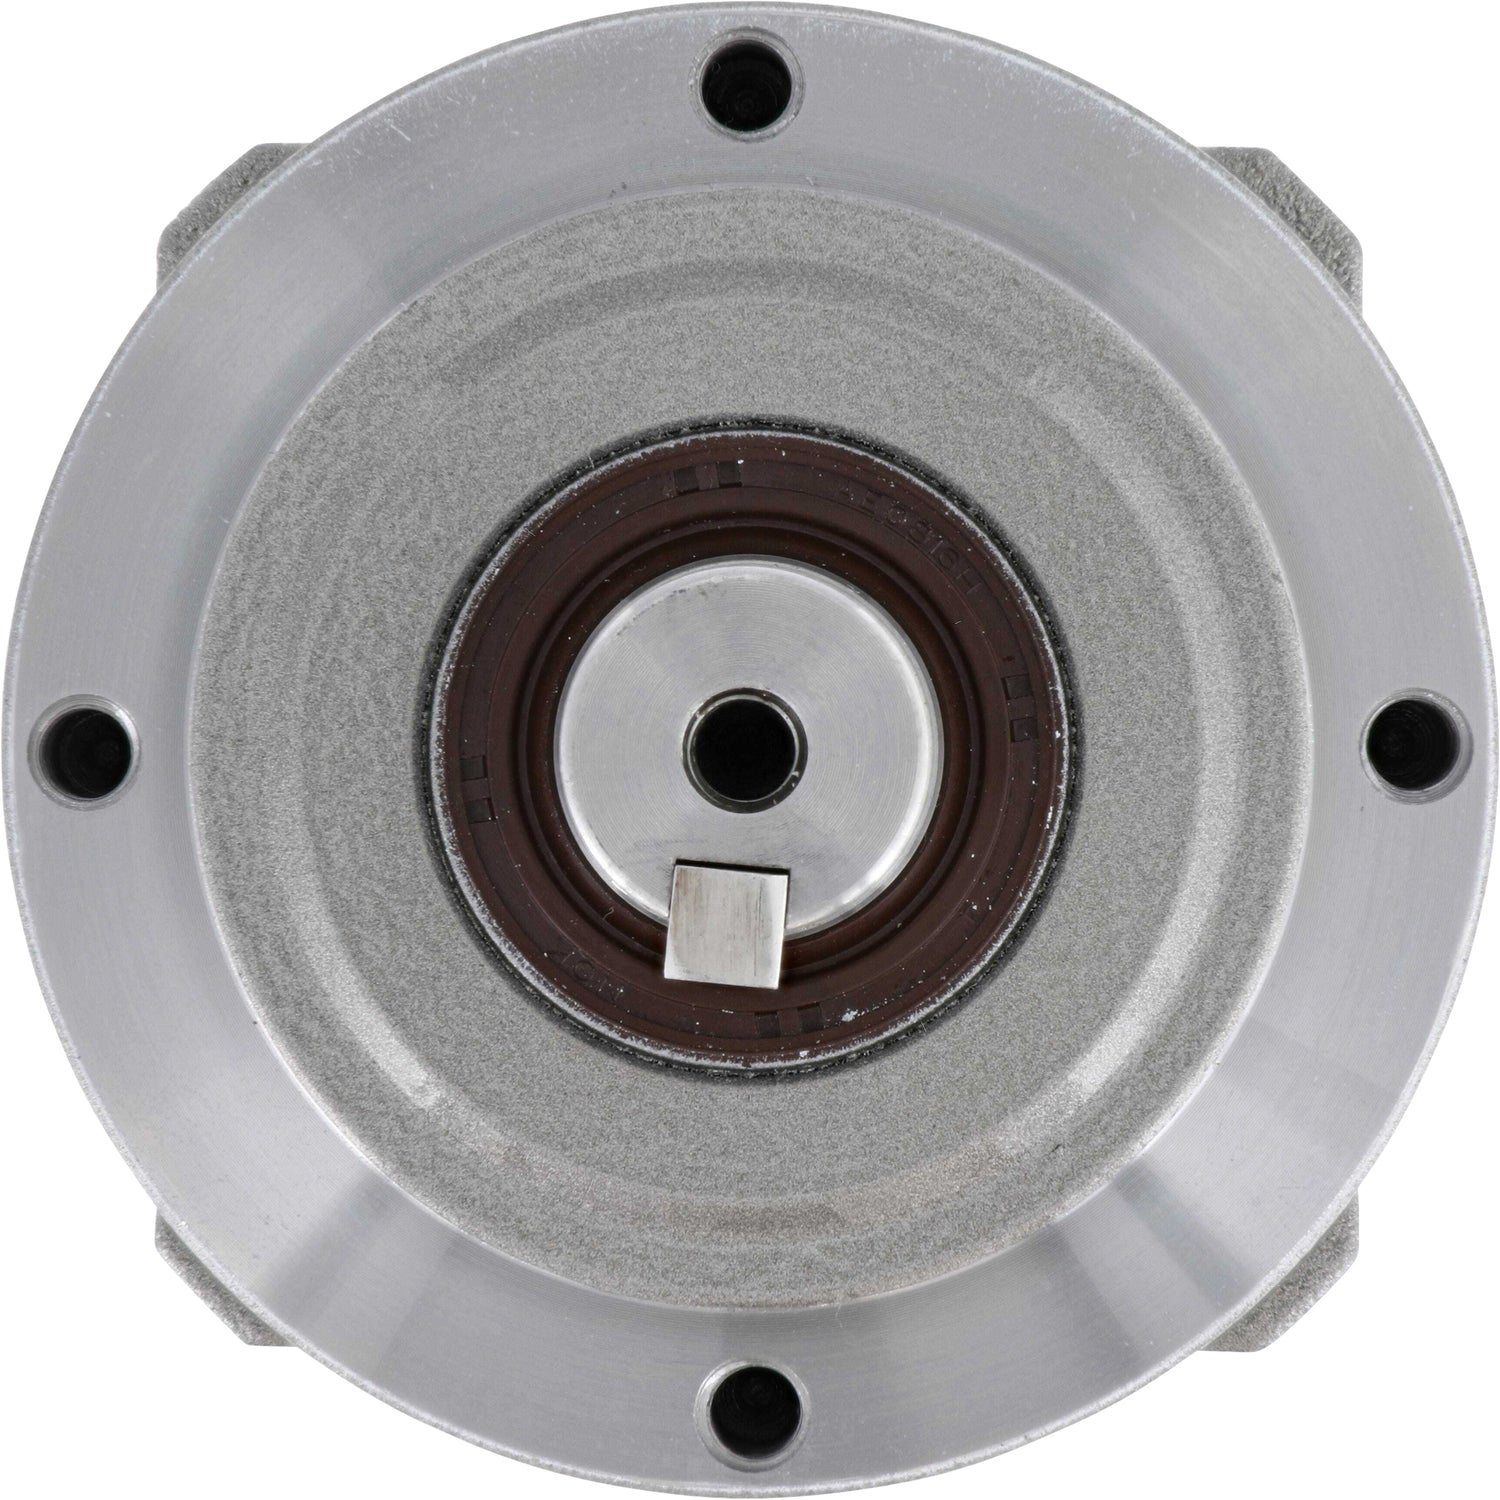 Grey gearbox on white background.